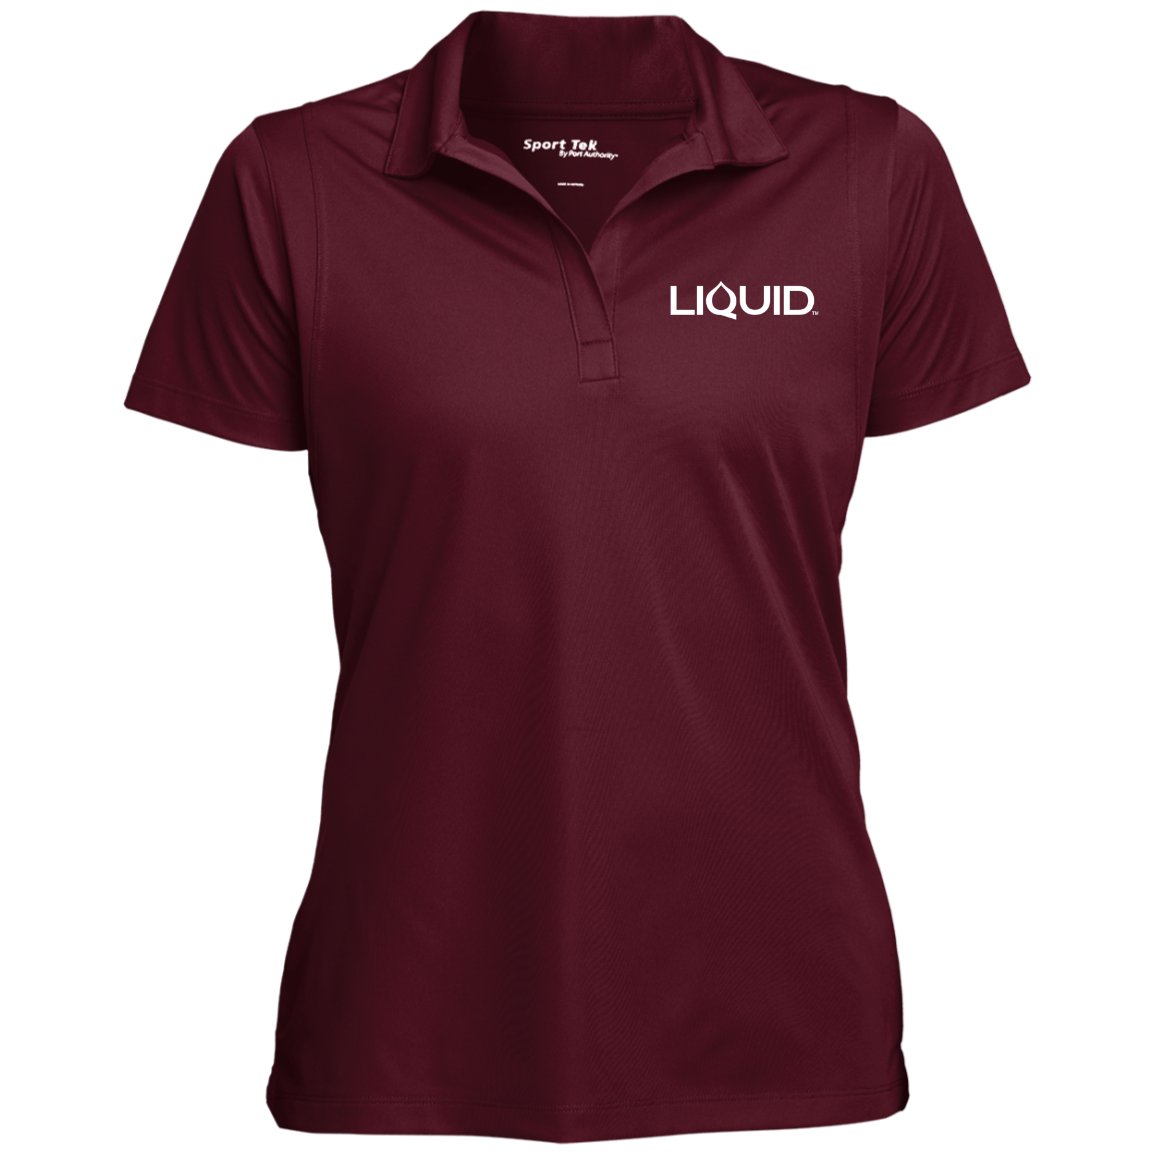 LST650 Women's Micropique Tag-Free Flat-Knit Collar Polo - Liquid Hydration Gear